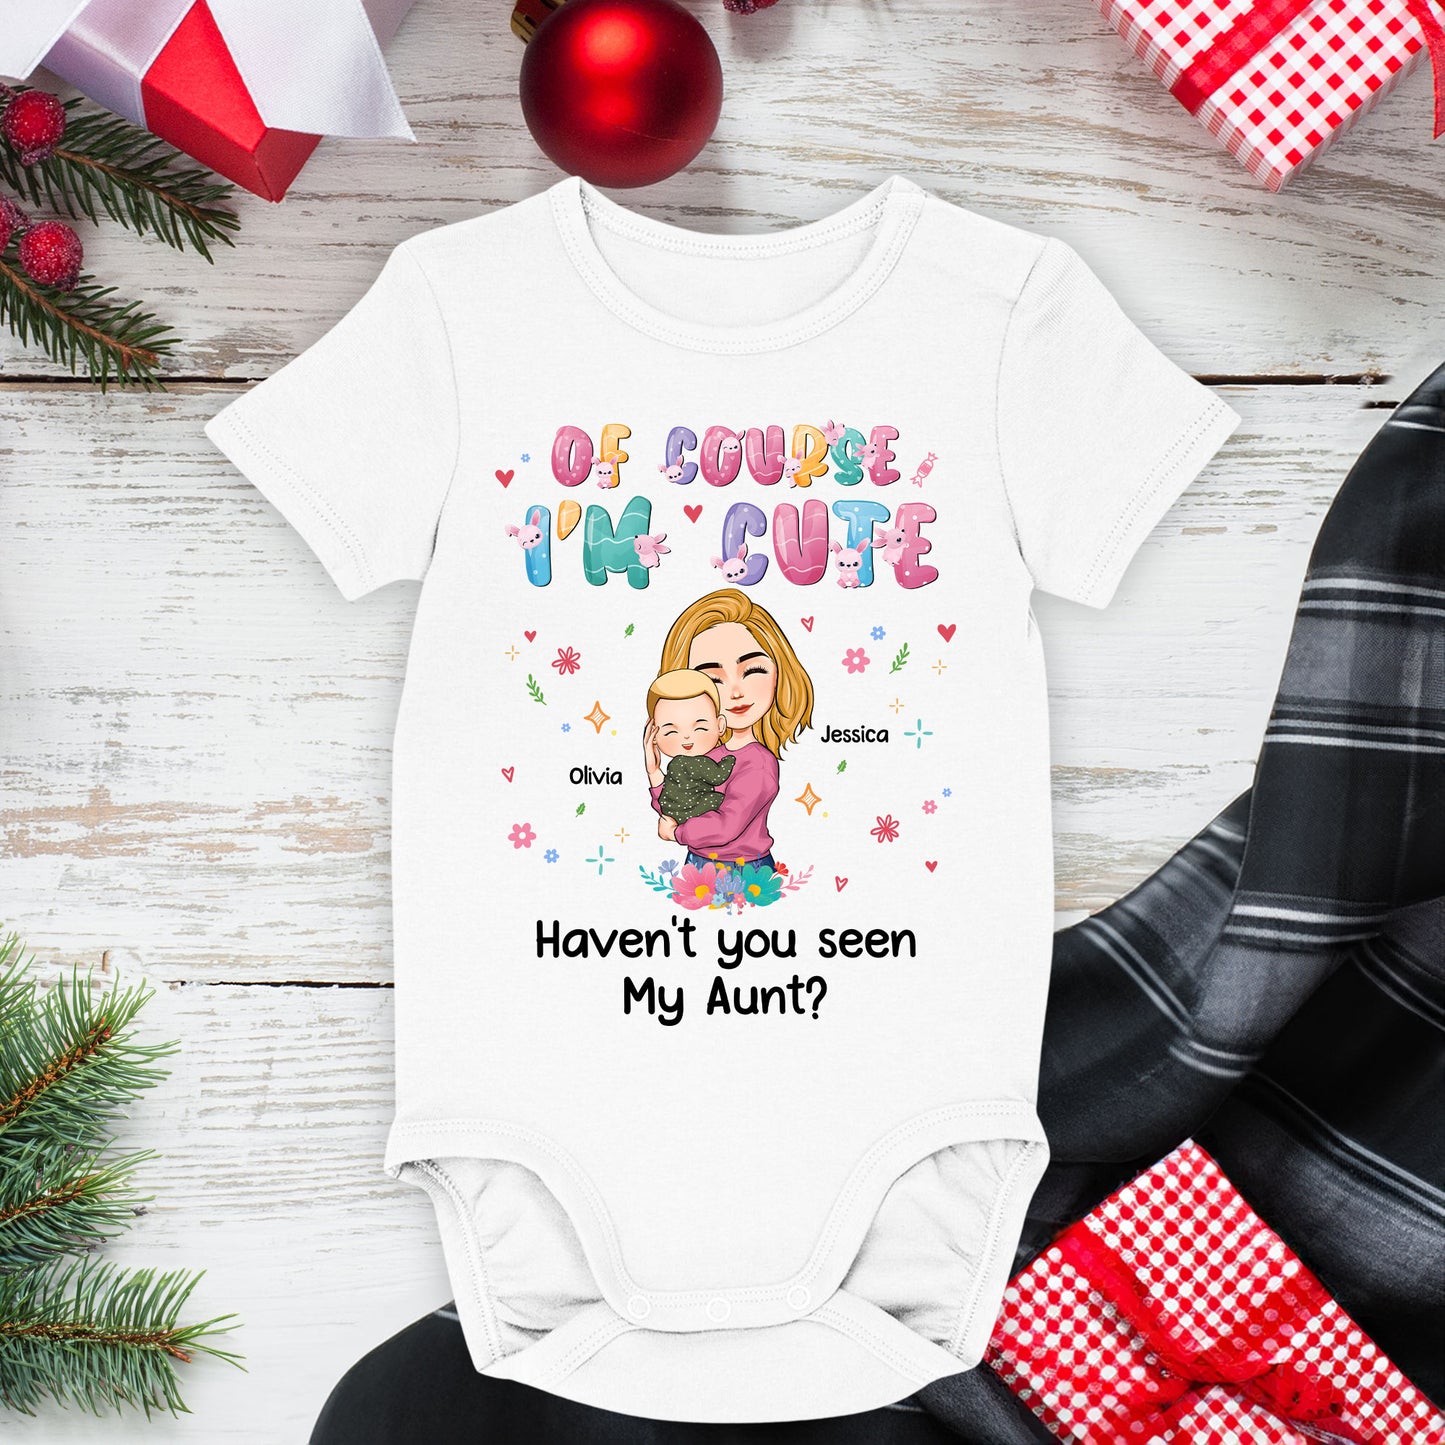 Of Course I'm Cute - Personalized Baby Onesie